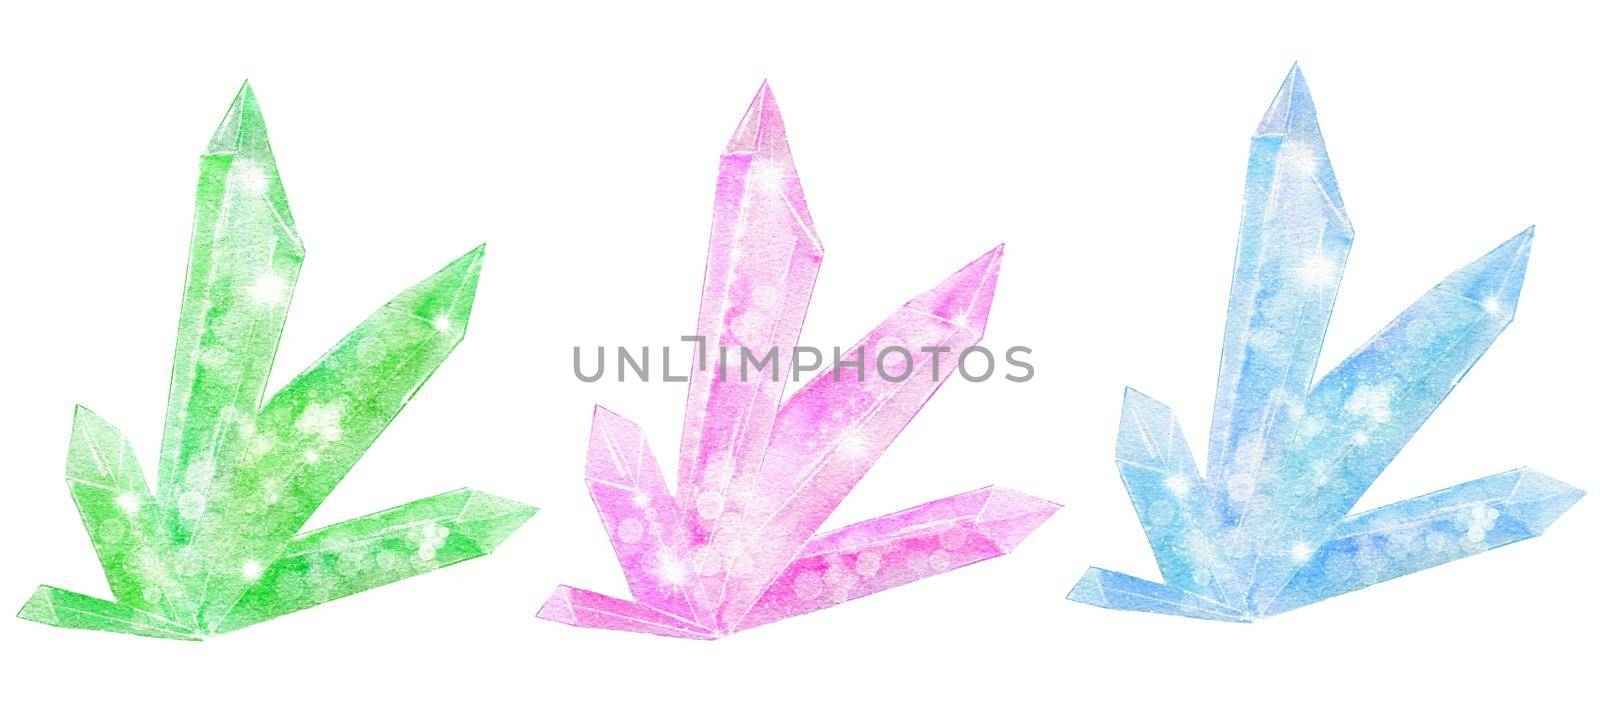 Watercolor illustration of shiny crystals, shimmering gemstones in pastel colors green pink purple blue. Elements for jewelry amethyst zircon magic mystic design, glitter background, witch witchcraft concept. by Lagmar